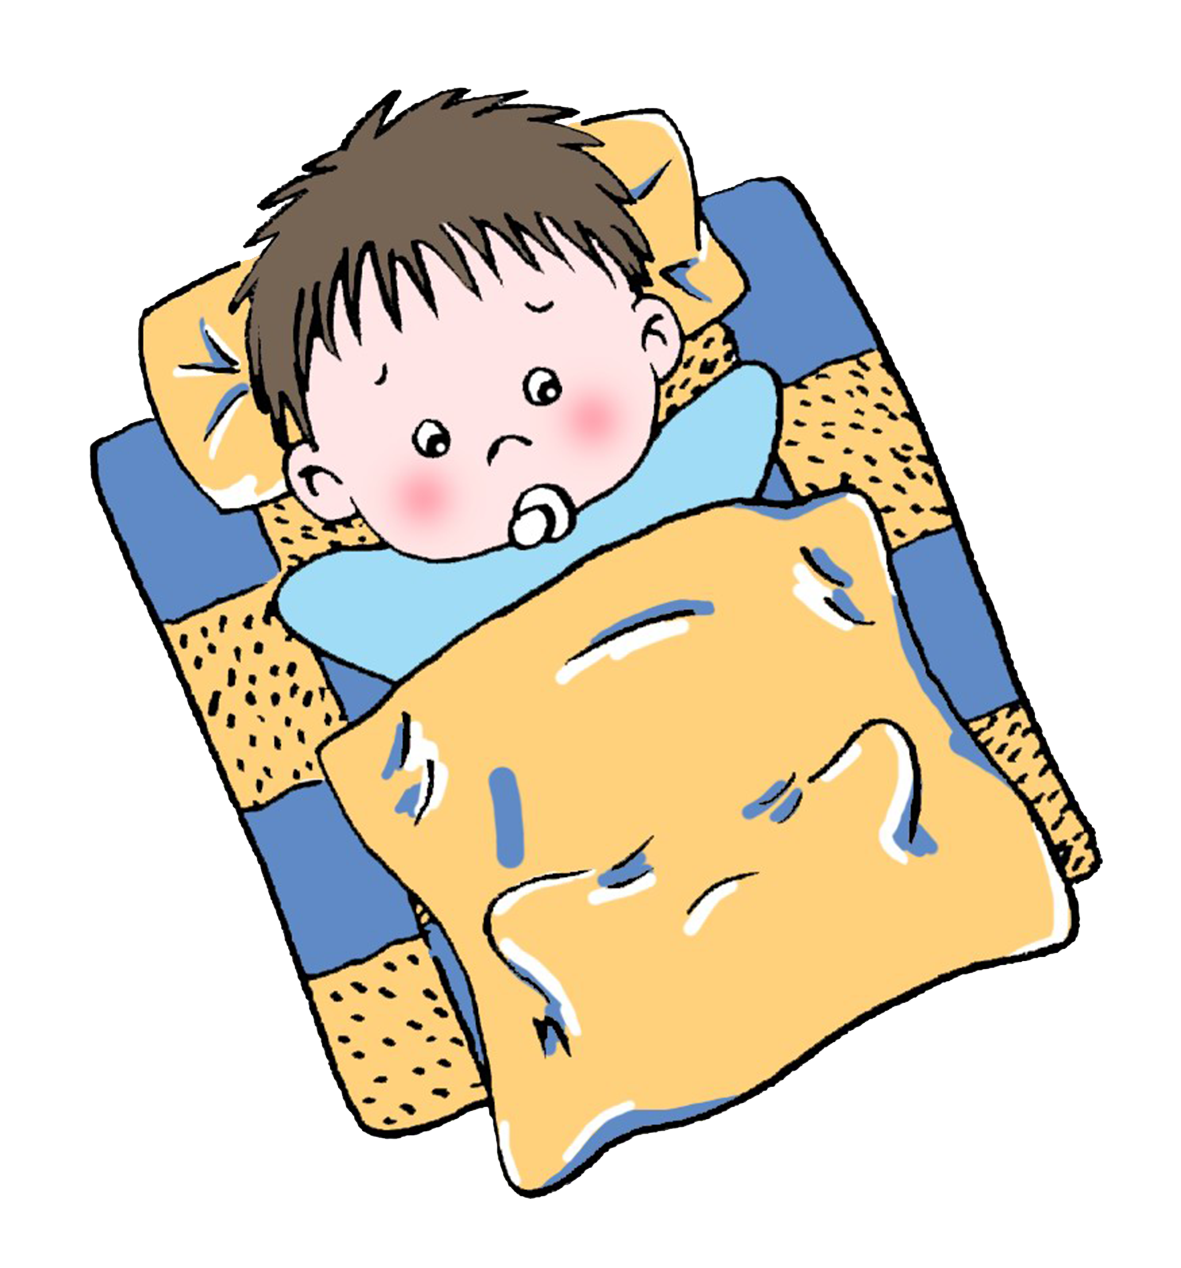 sleeping clipart toddler bed